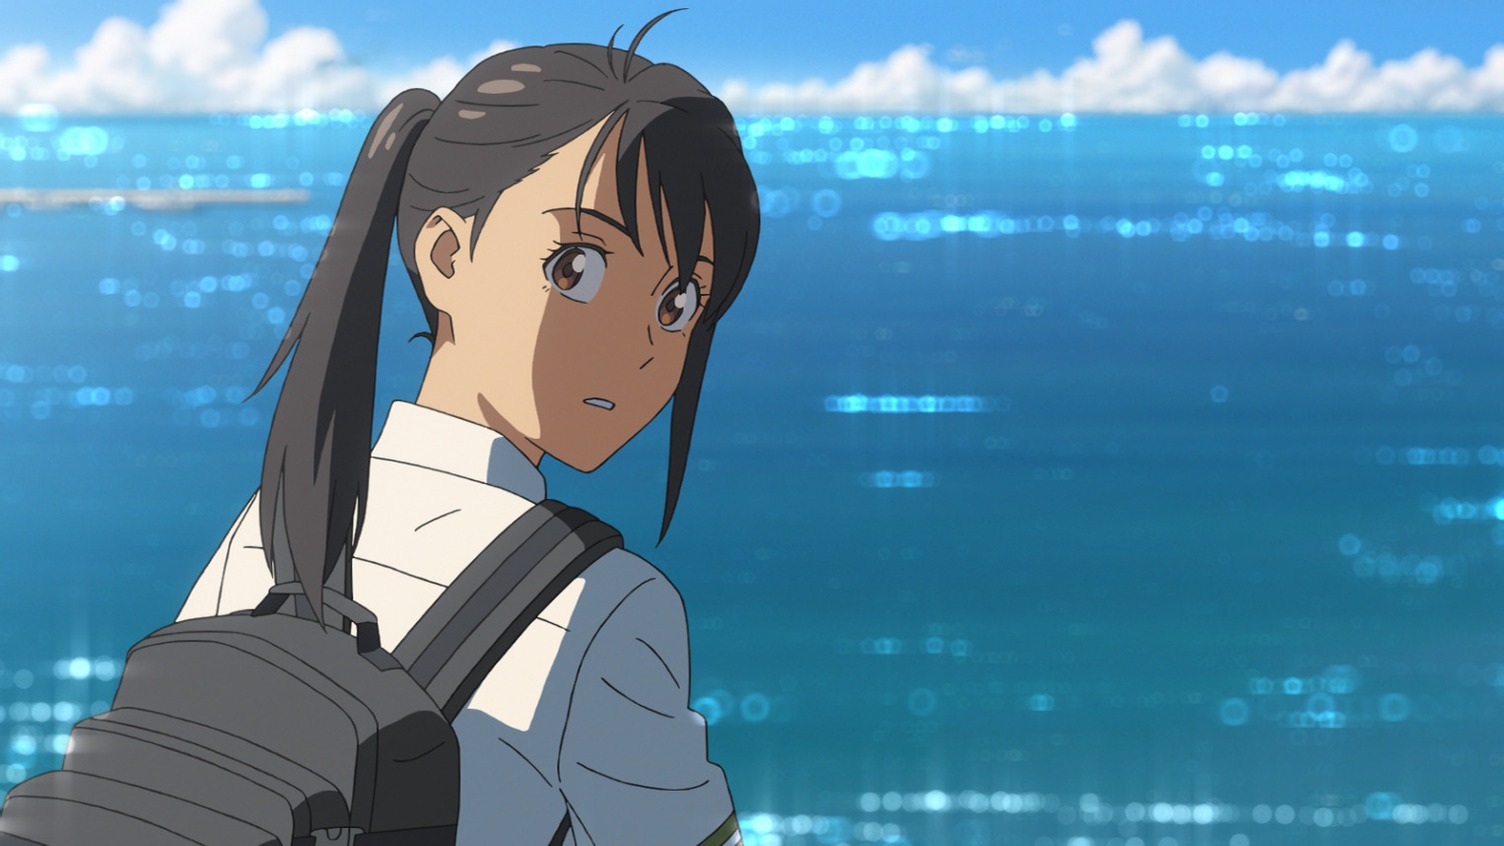 Makoto Shinkai’s Suzume Stands as 9th Highest-Grossing Anime Film of All Time After First Weekend in China